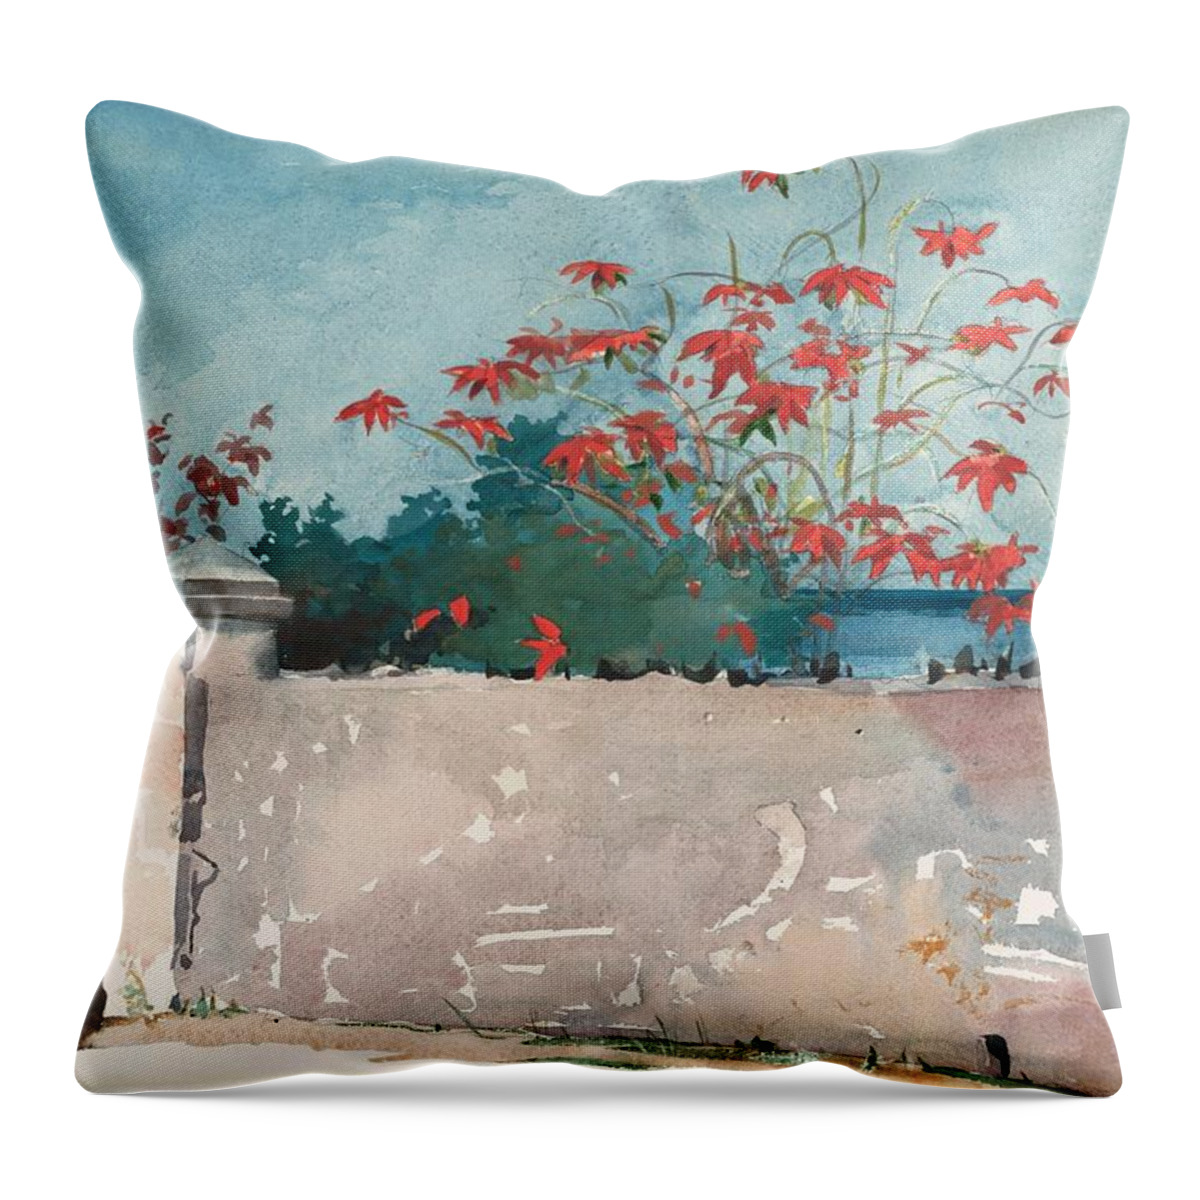 Winslow Homer Throw Pillow featuring the painting Nassau Bahamas by Celestial Images